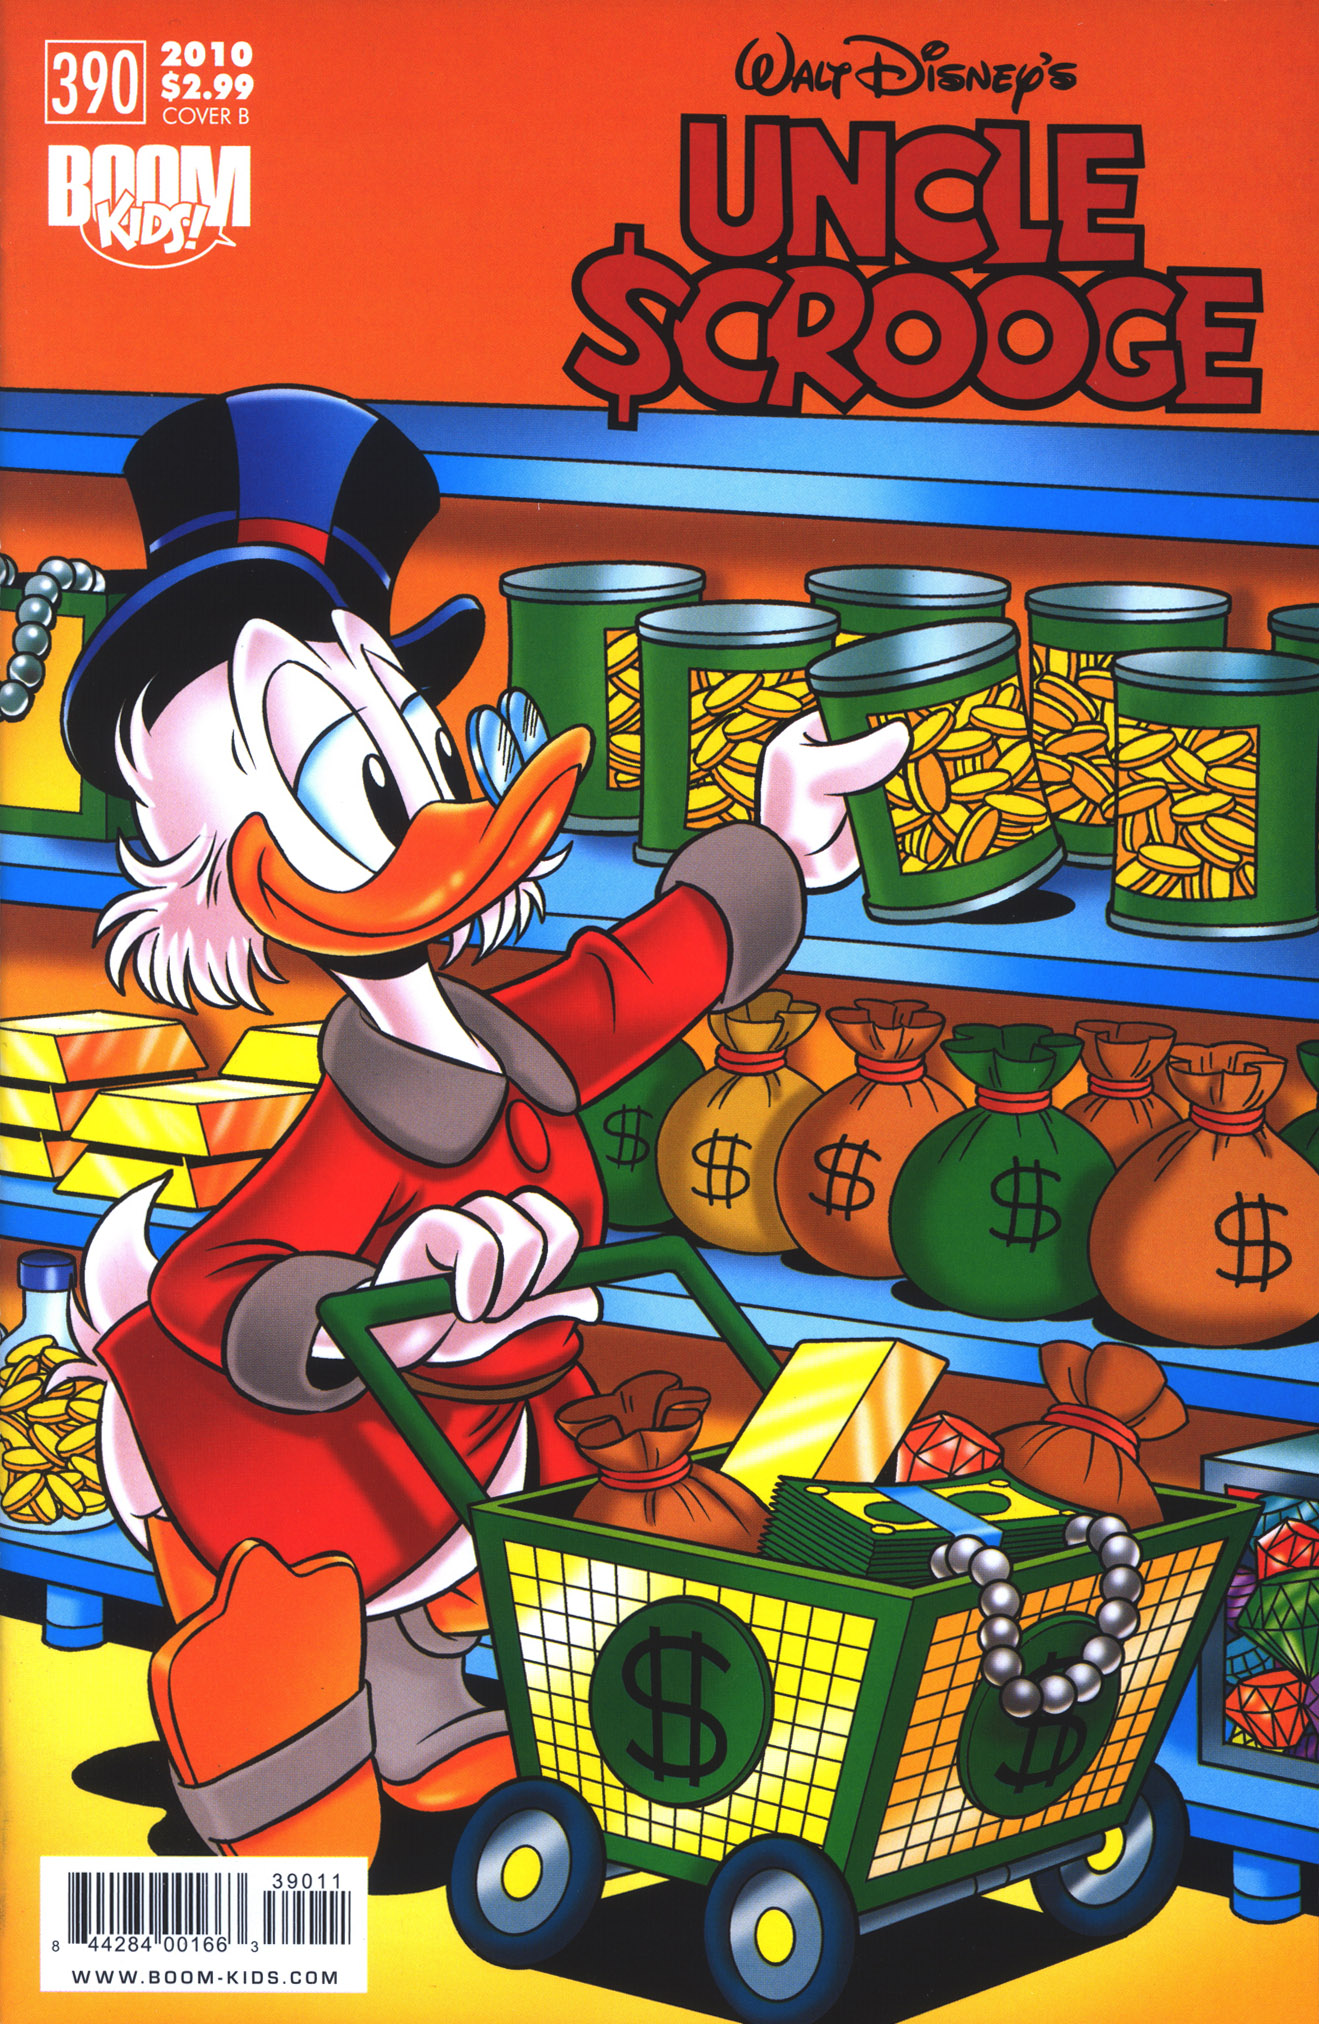 Read online Uncle Scrooge (2009) comic -  Issue #390 - 2